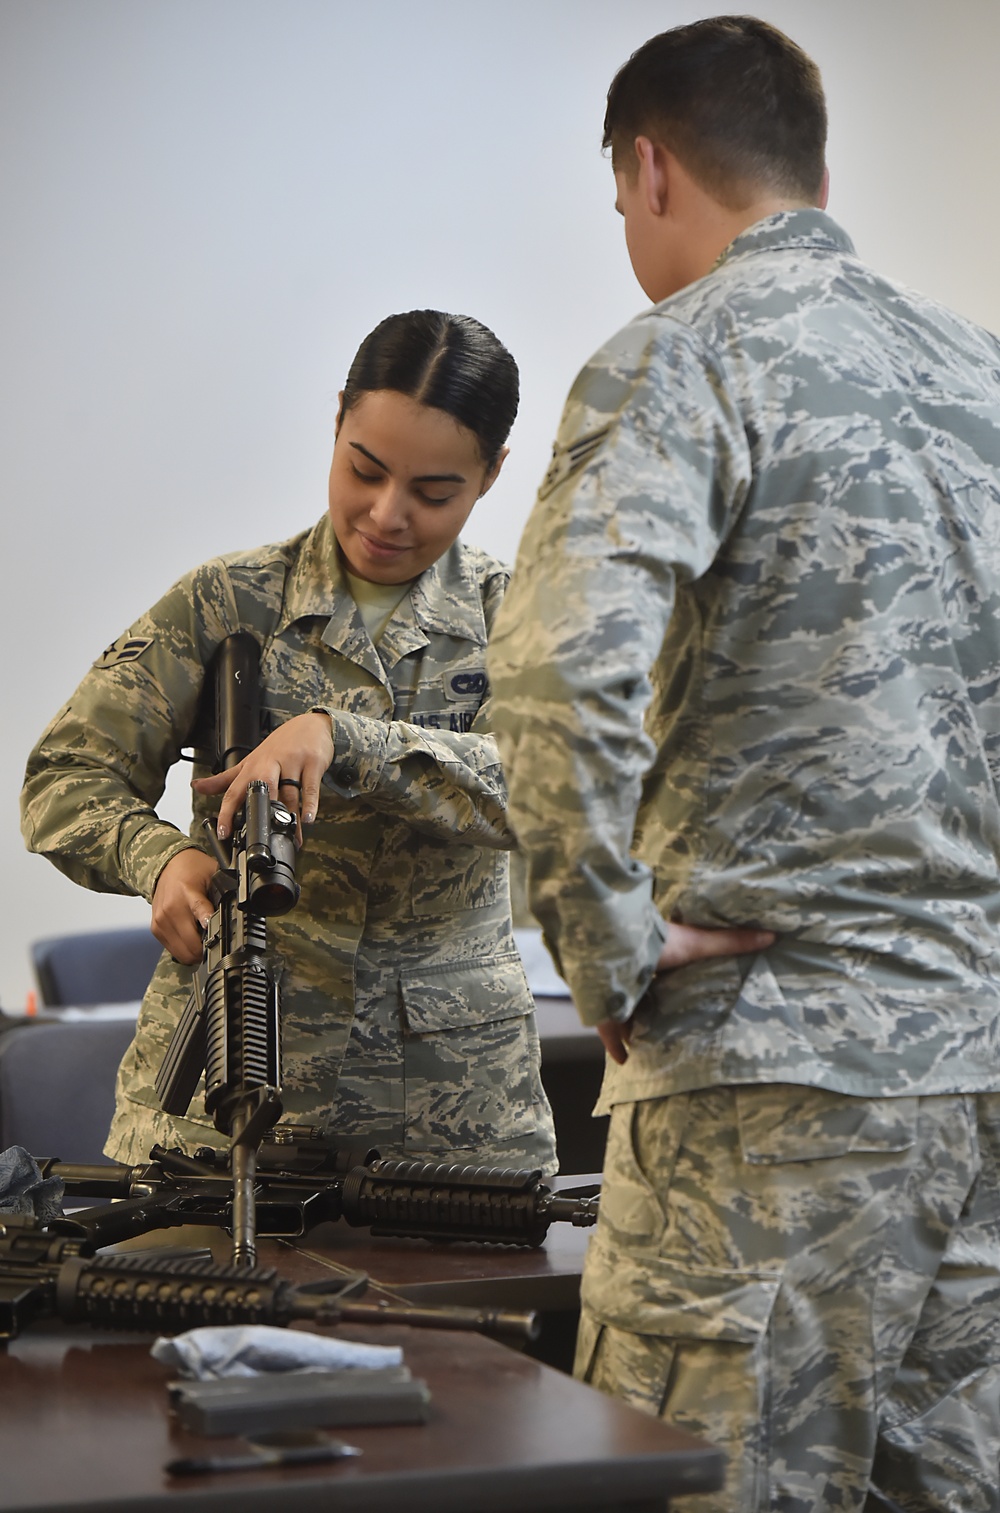 CATM instructors support joint warfighter